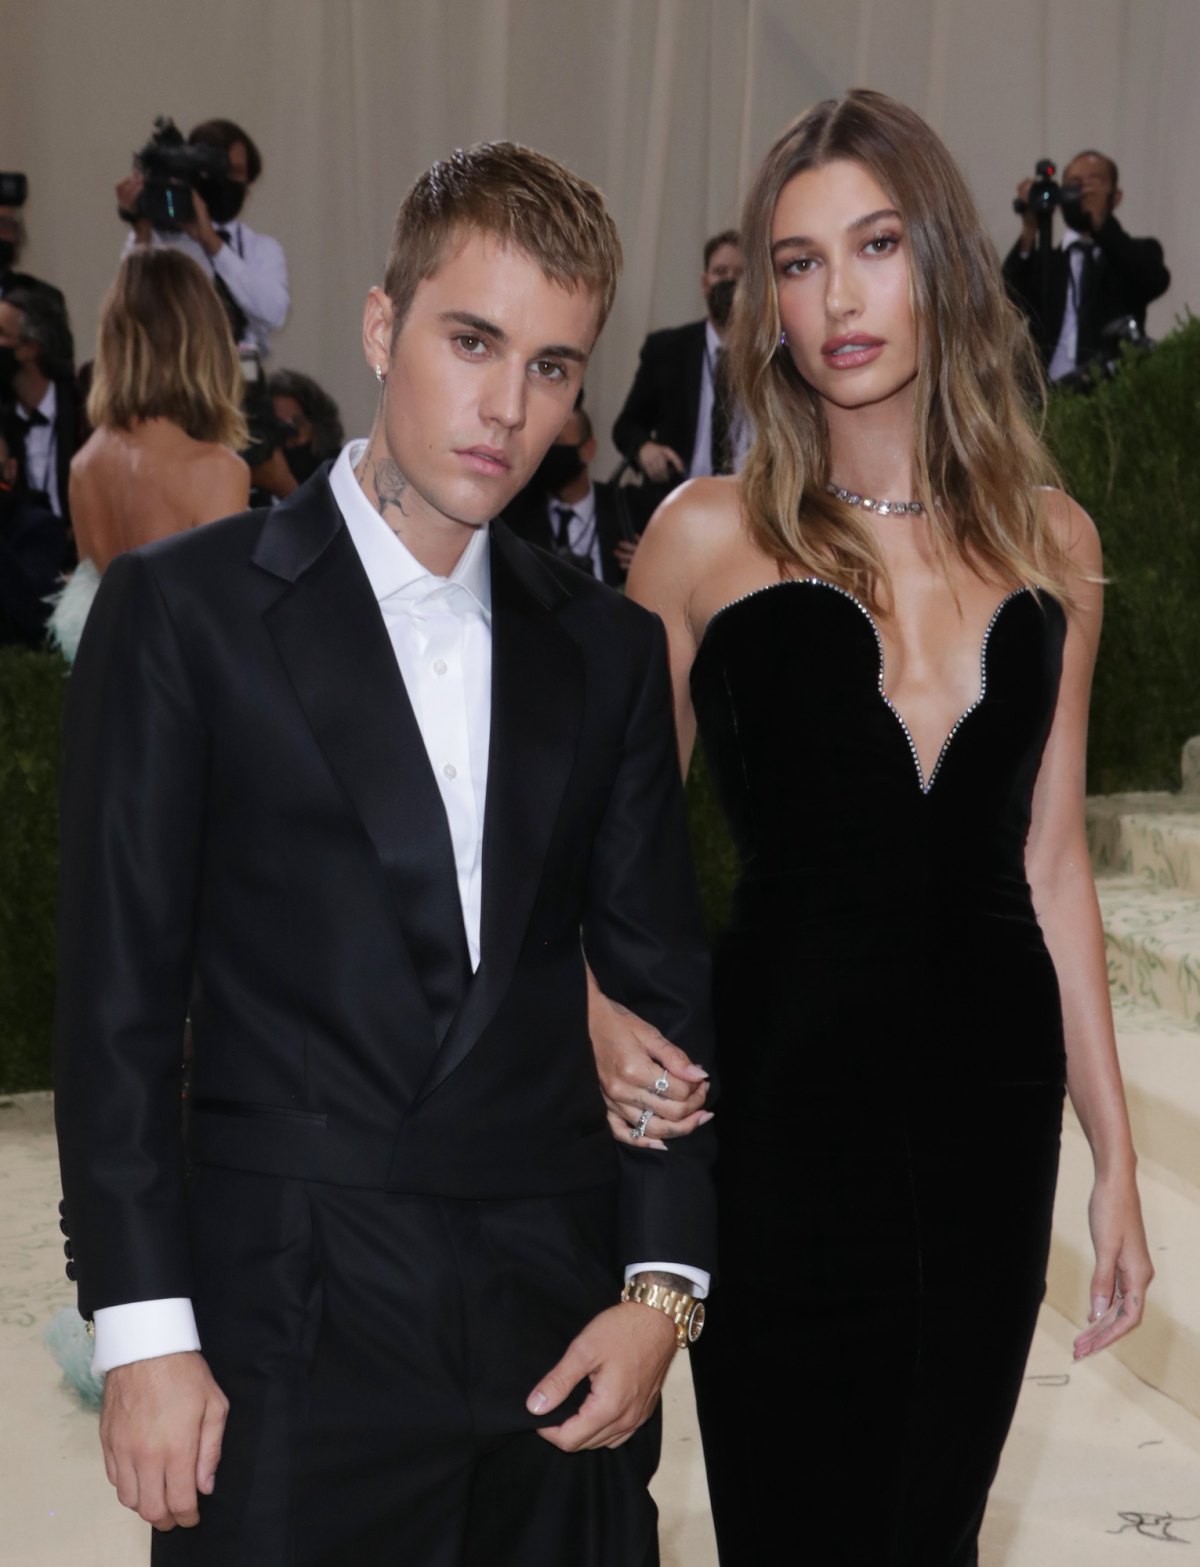 Married Life With Hailey and Justin Bieber, Gucci Pulls Racist Product